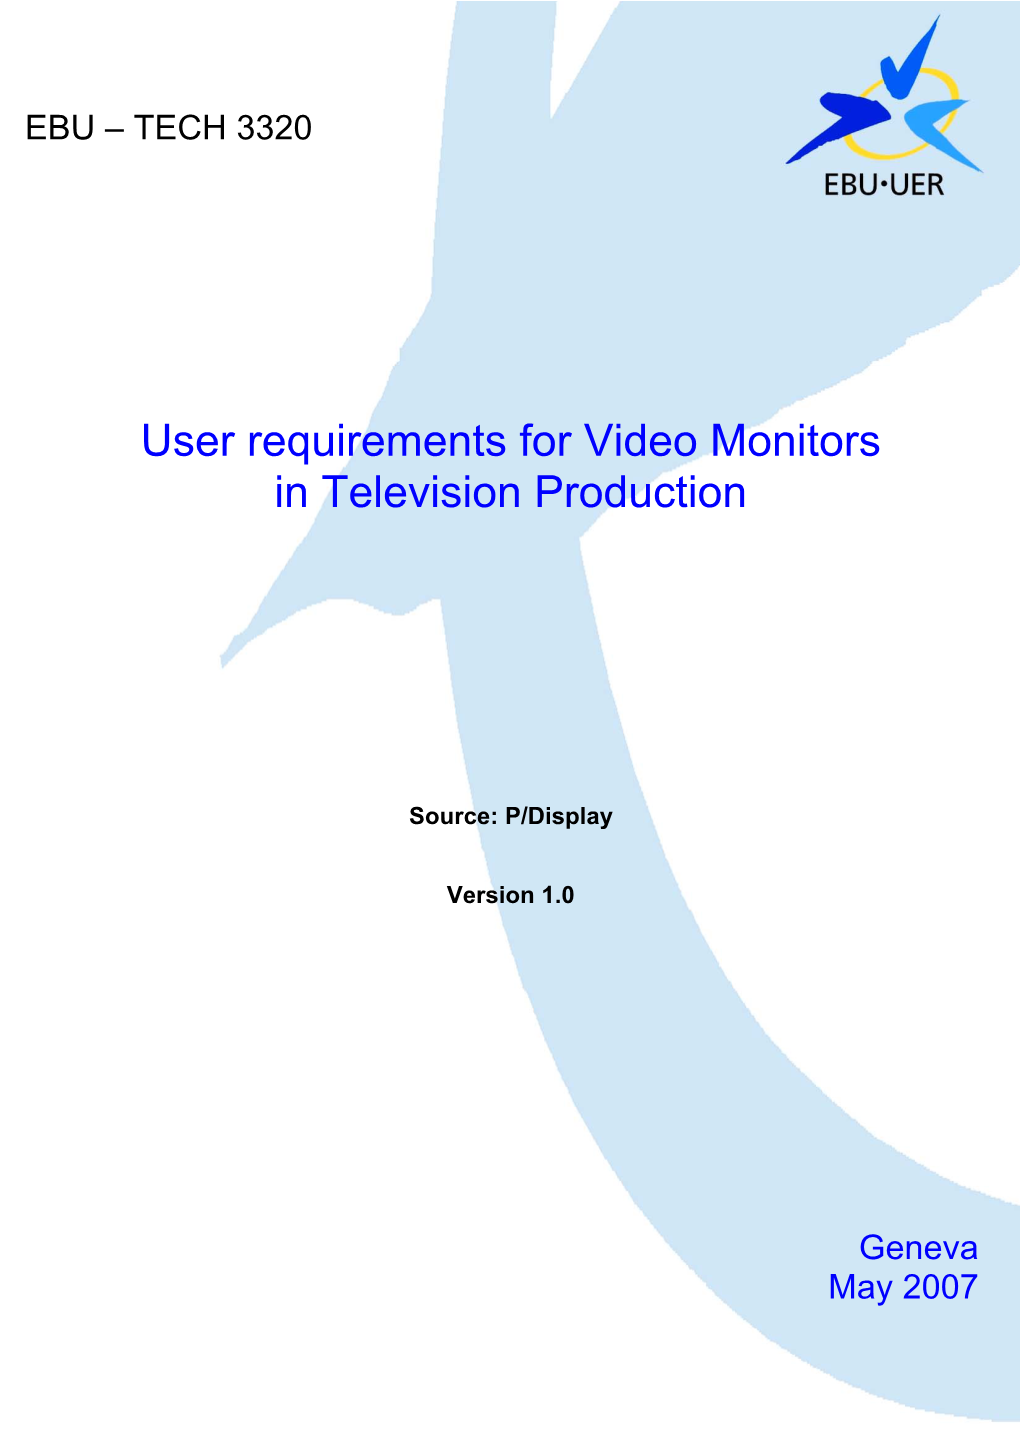 User Requirements for Video Monitors in Television Production